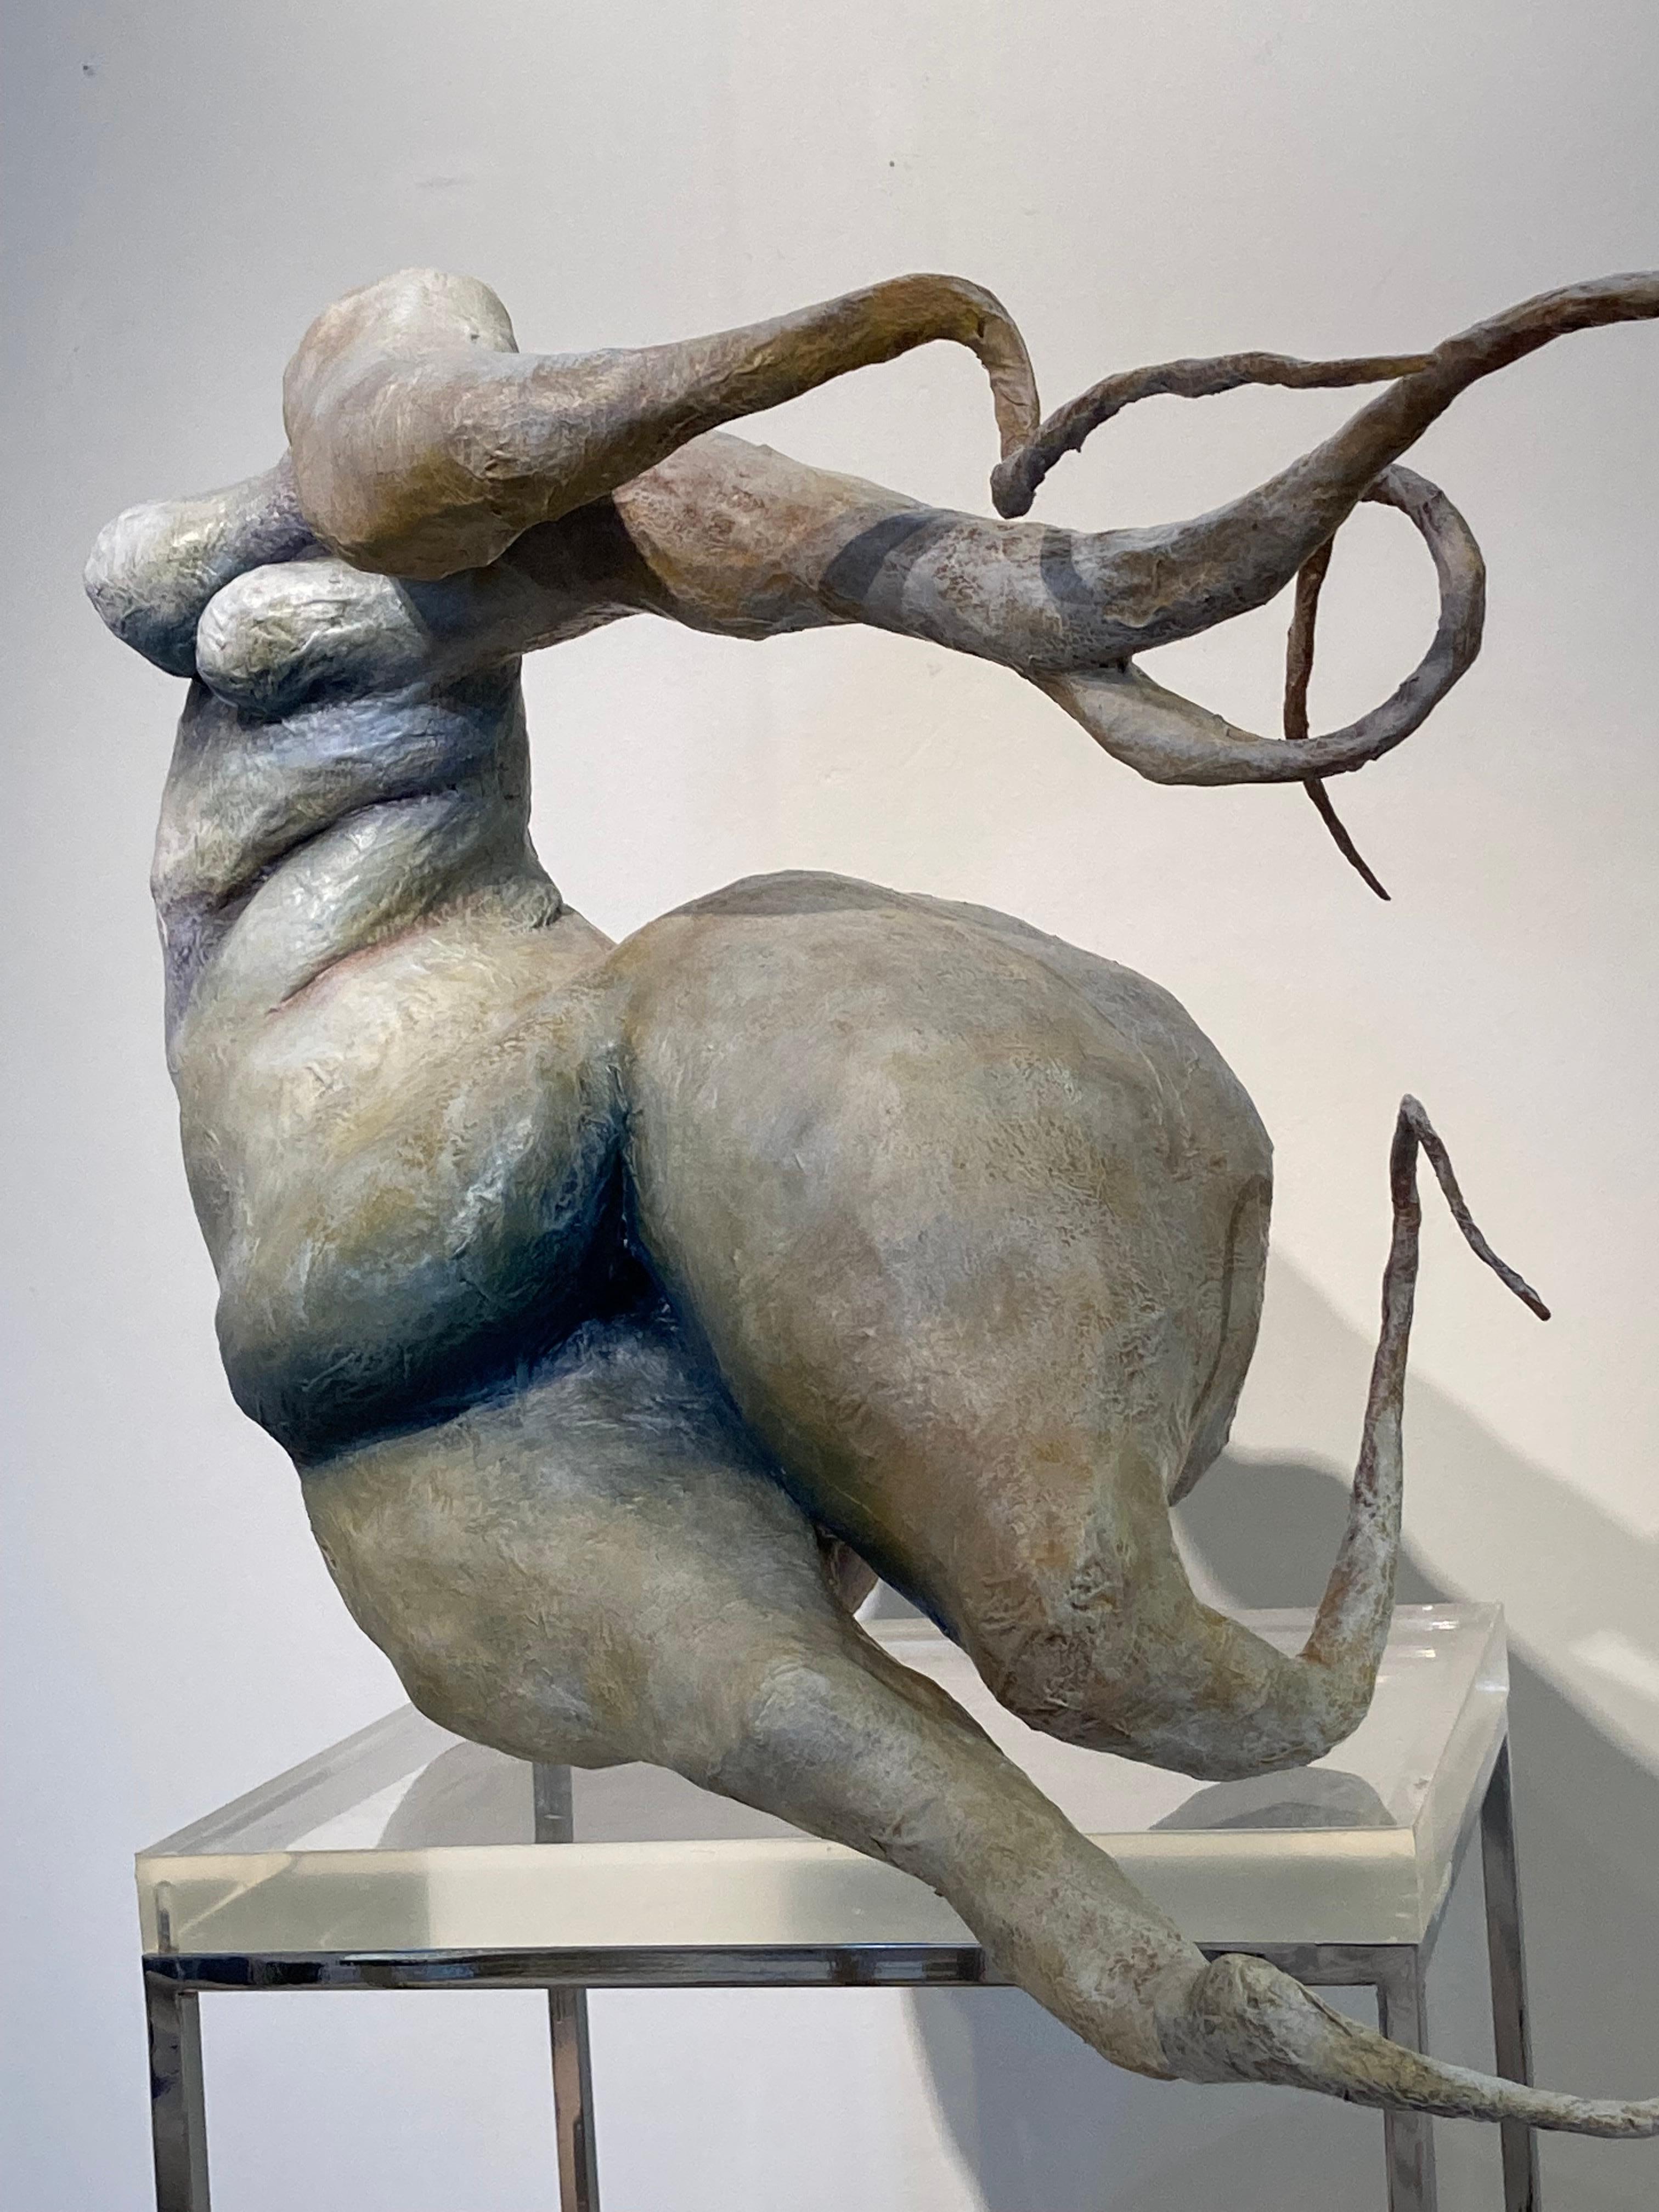 African-American artist, Nathan Lee, created this mixed media sculpture in 2020 with dimensions 16